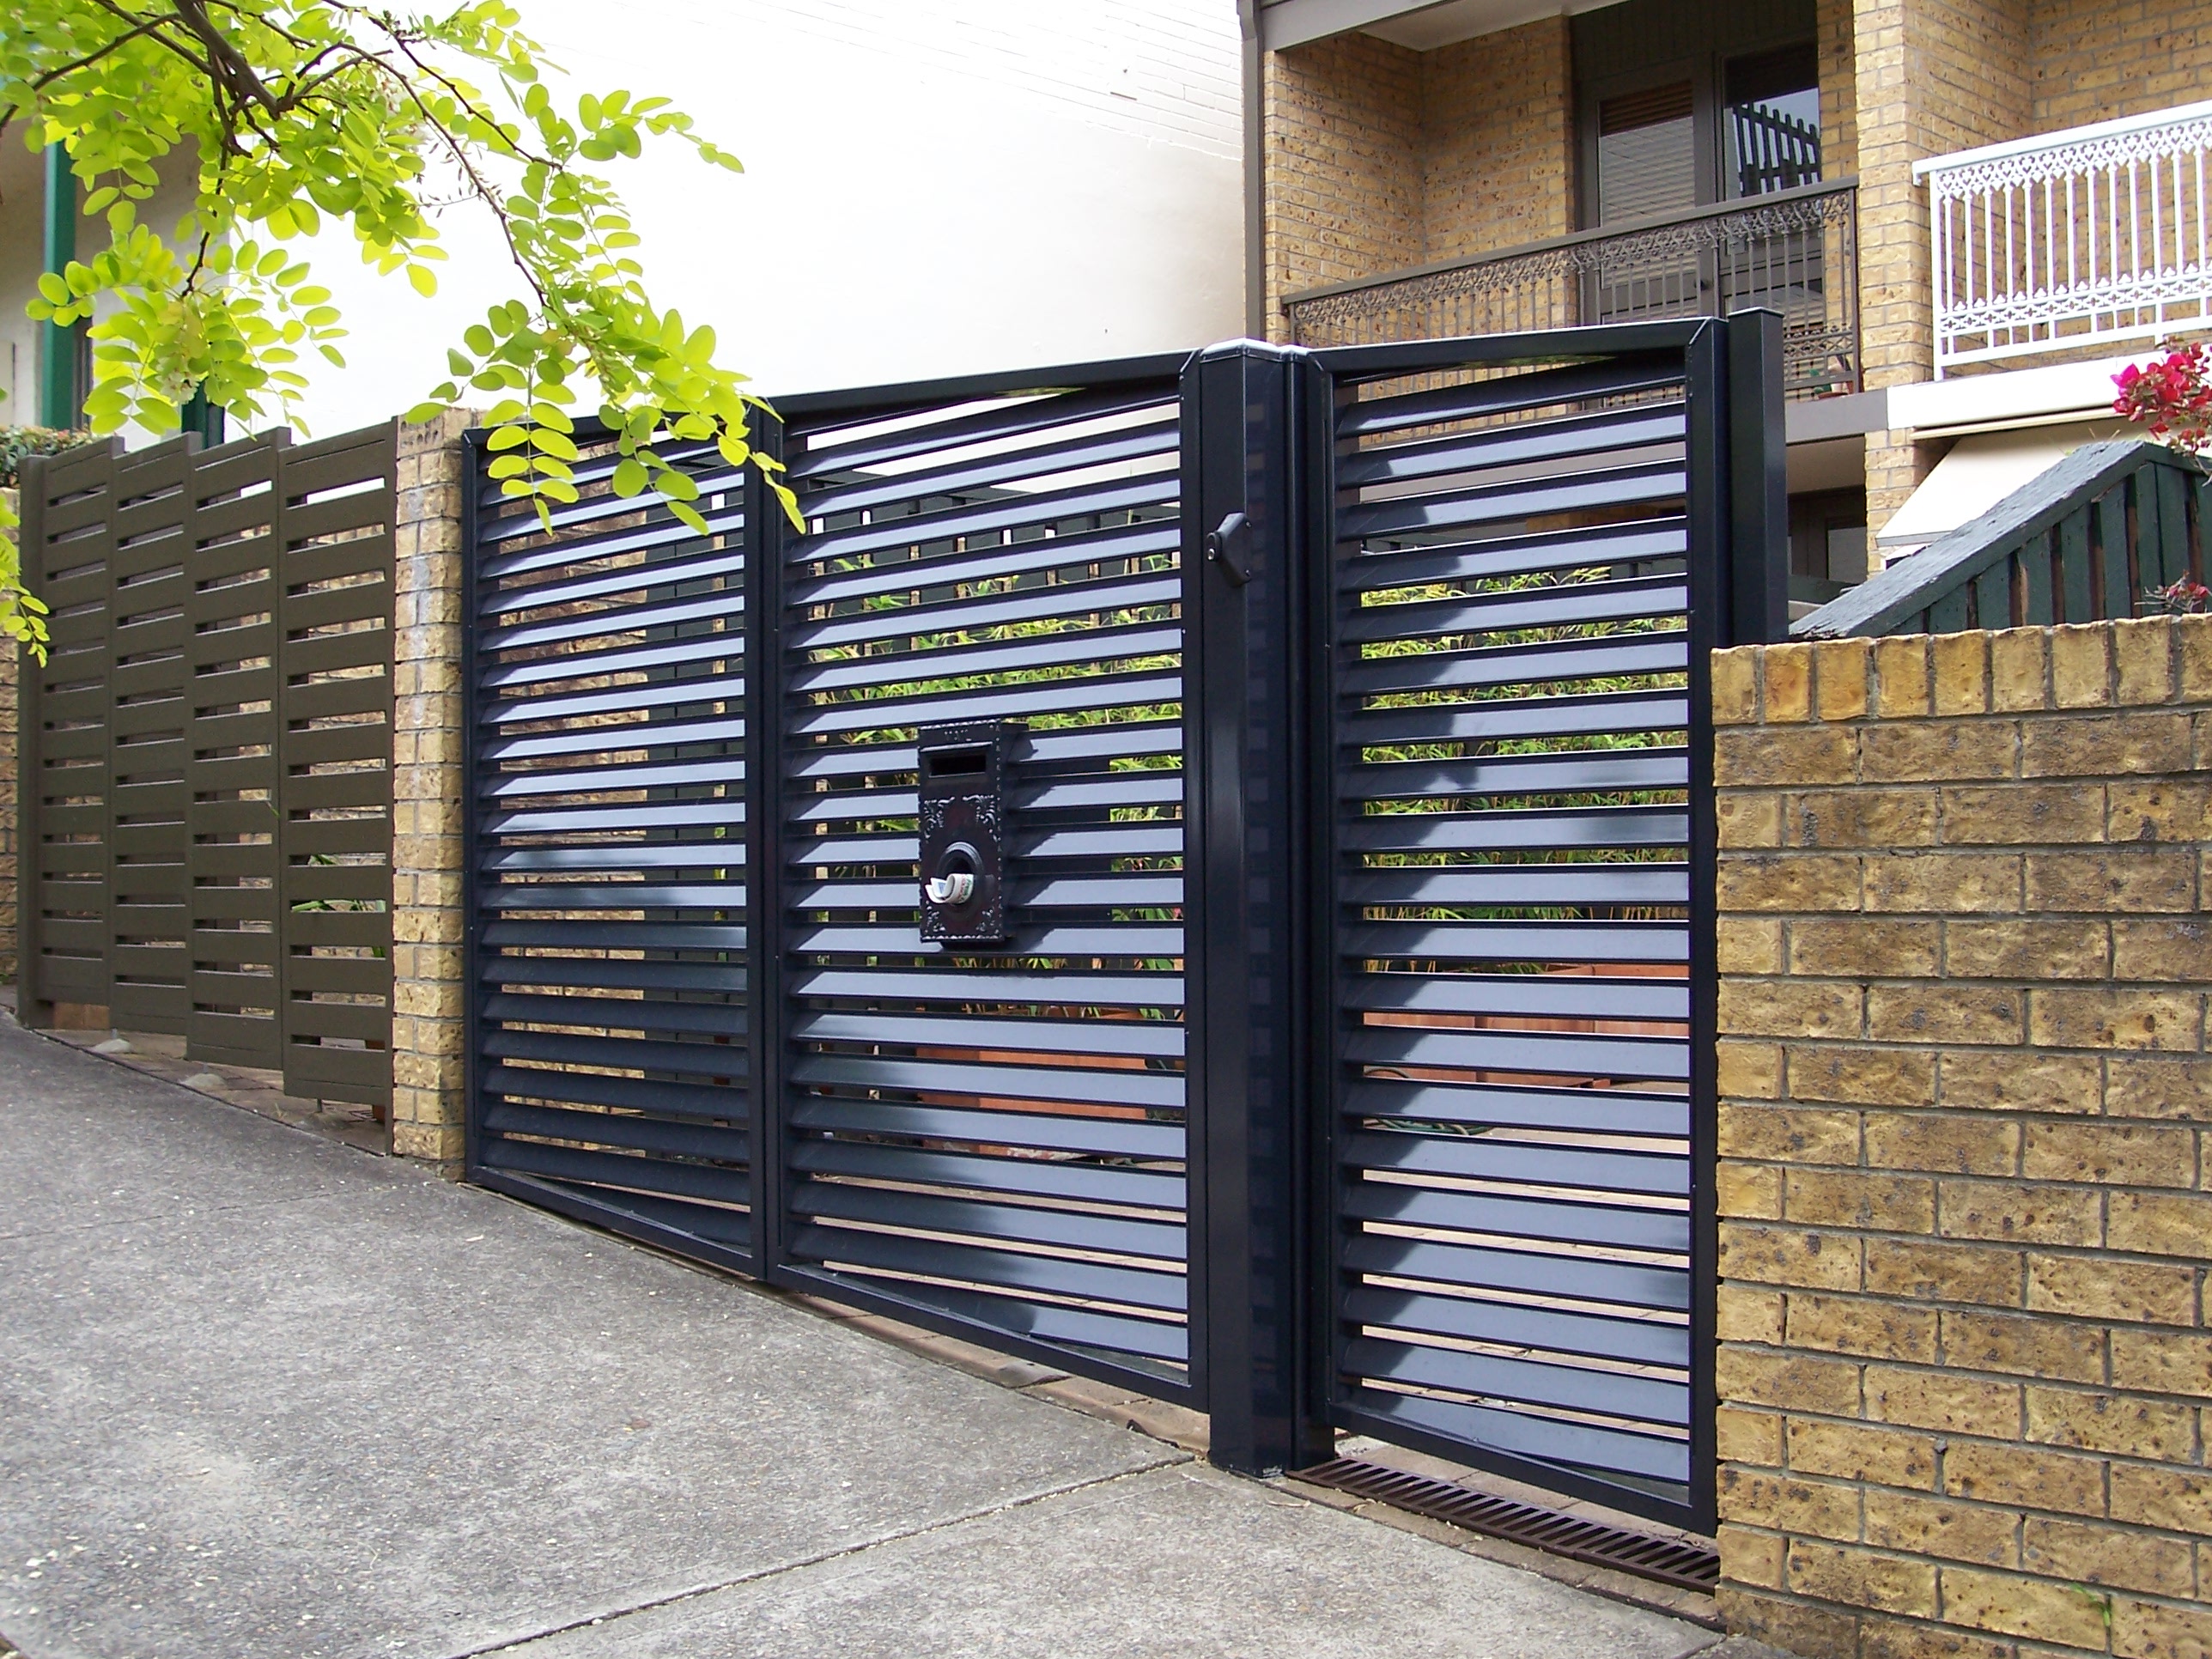 Dunn & Farrugia Fencing And Gates Queanbeyan East (02) 6284 2688